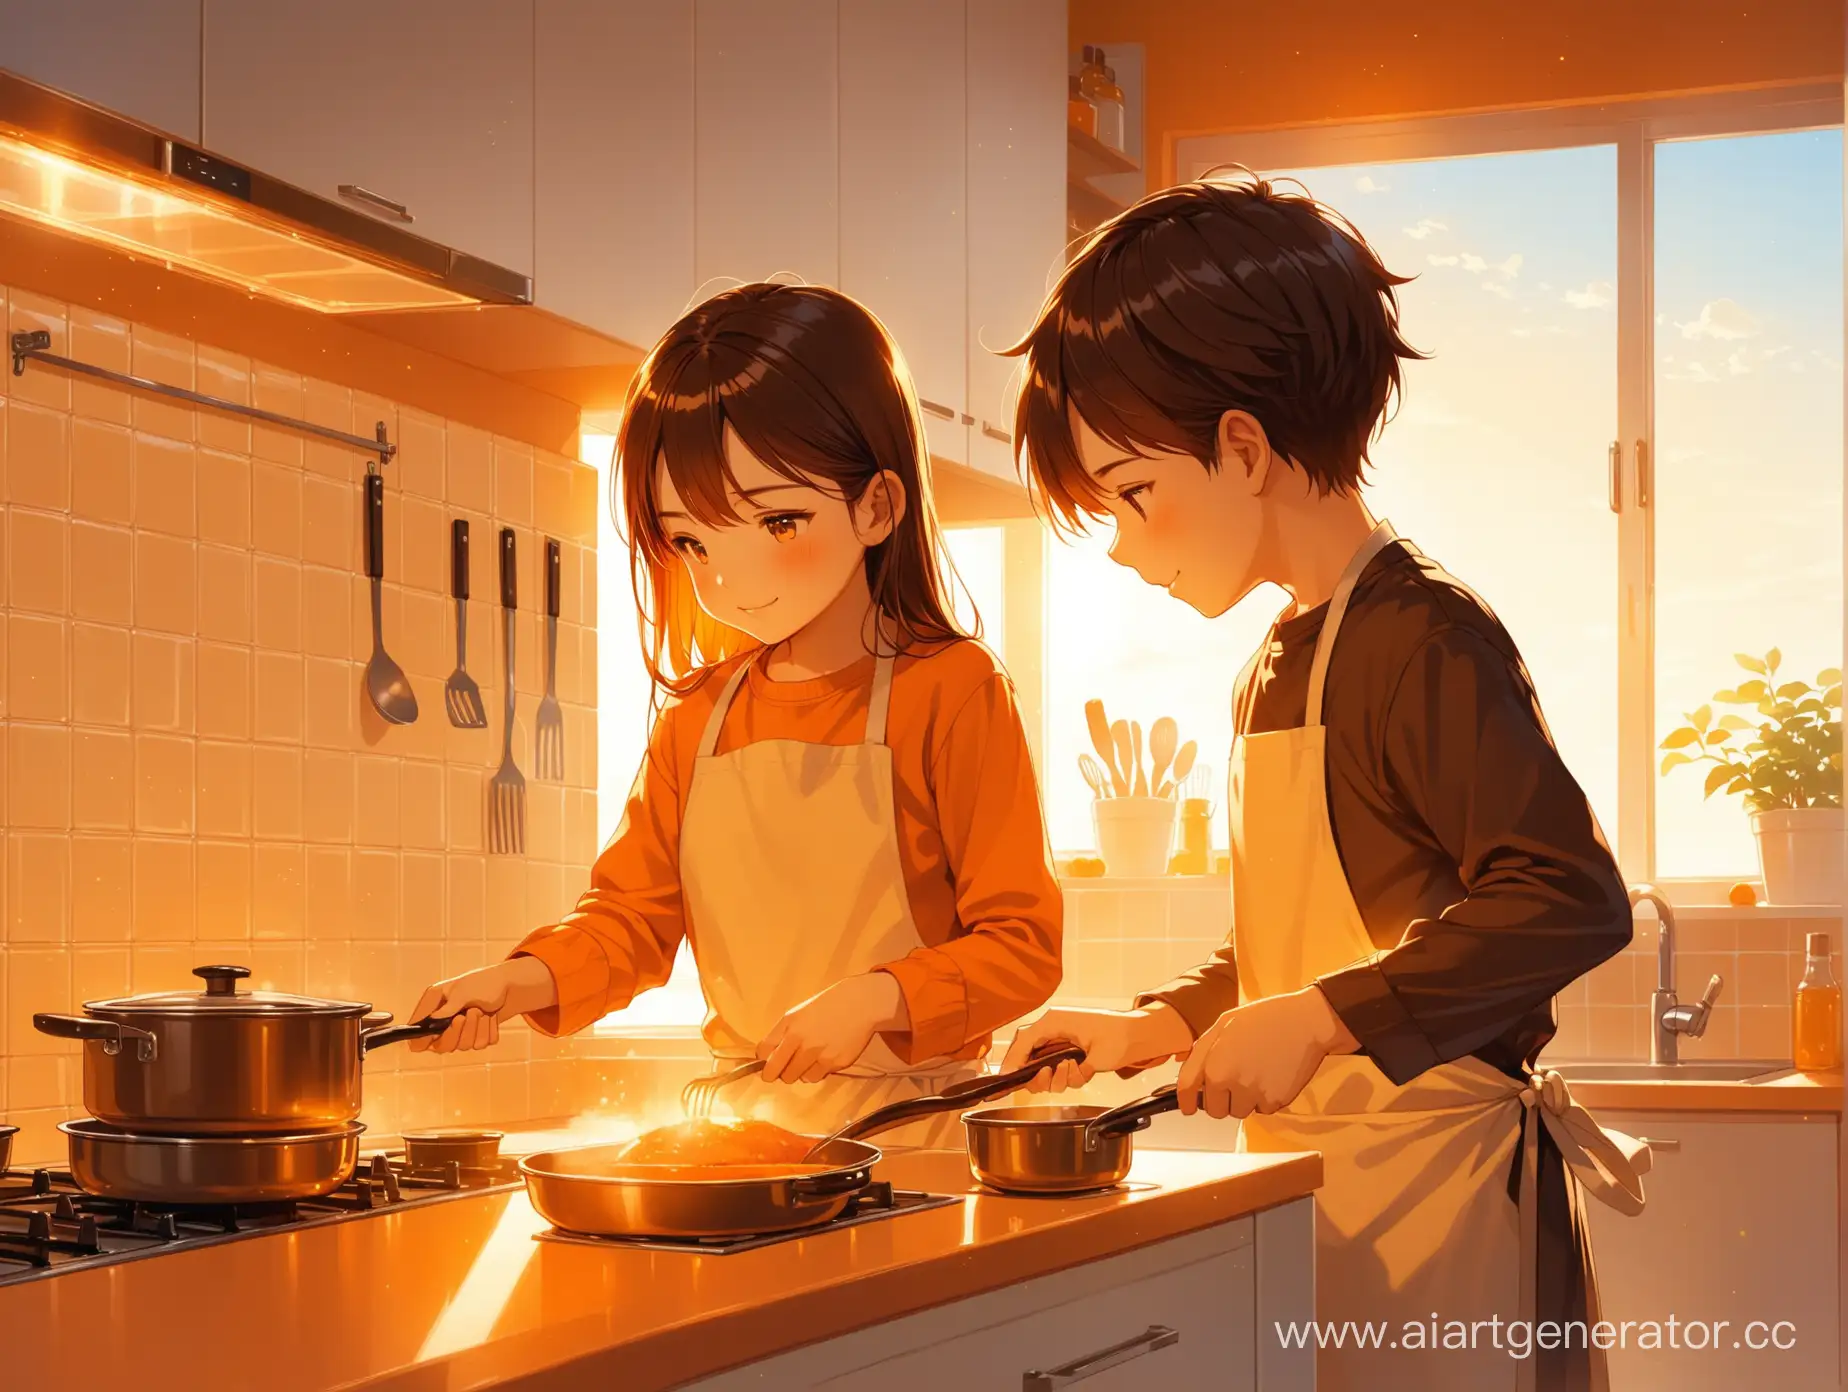 Children-Cooking-Together-in-Vibrant-Kitchen-with-Orange-Lighting